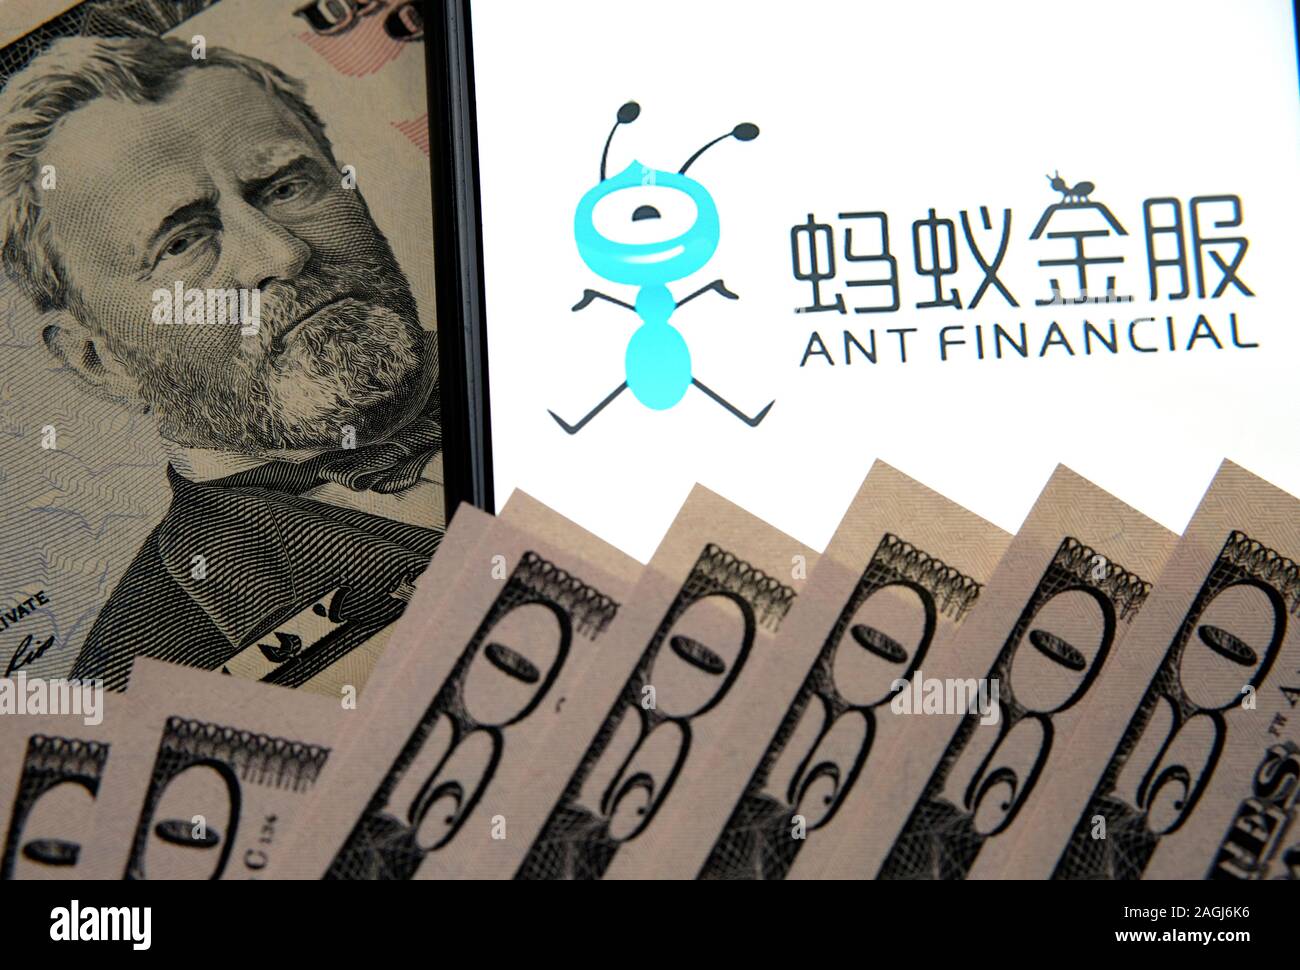 Portrait of Ulysses Grant on 50 dollar bill and Ant Financial logo on the smartphone screen. Conceptual photo. Stock Photo